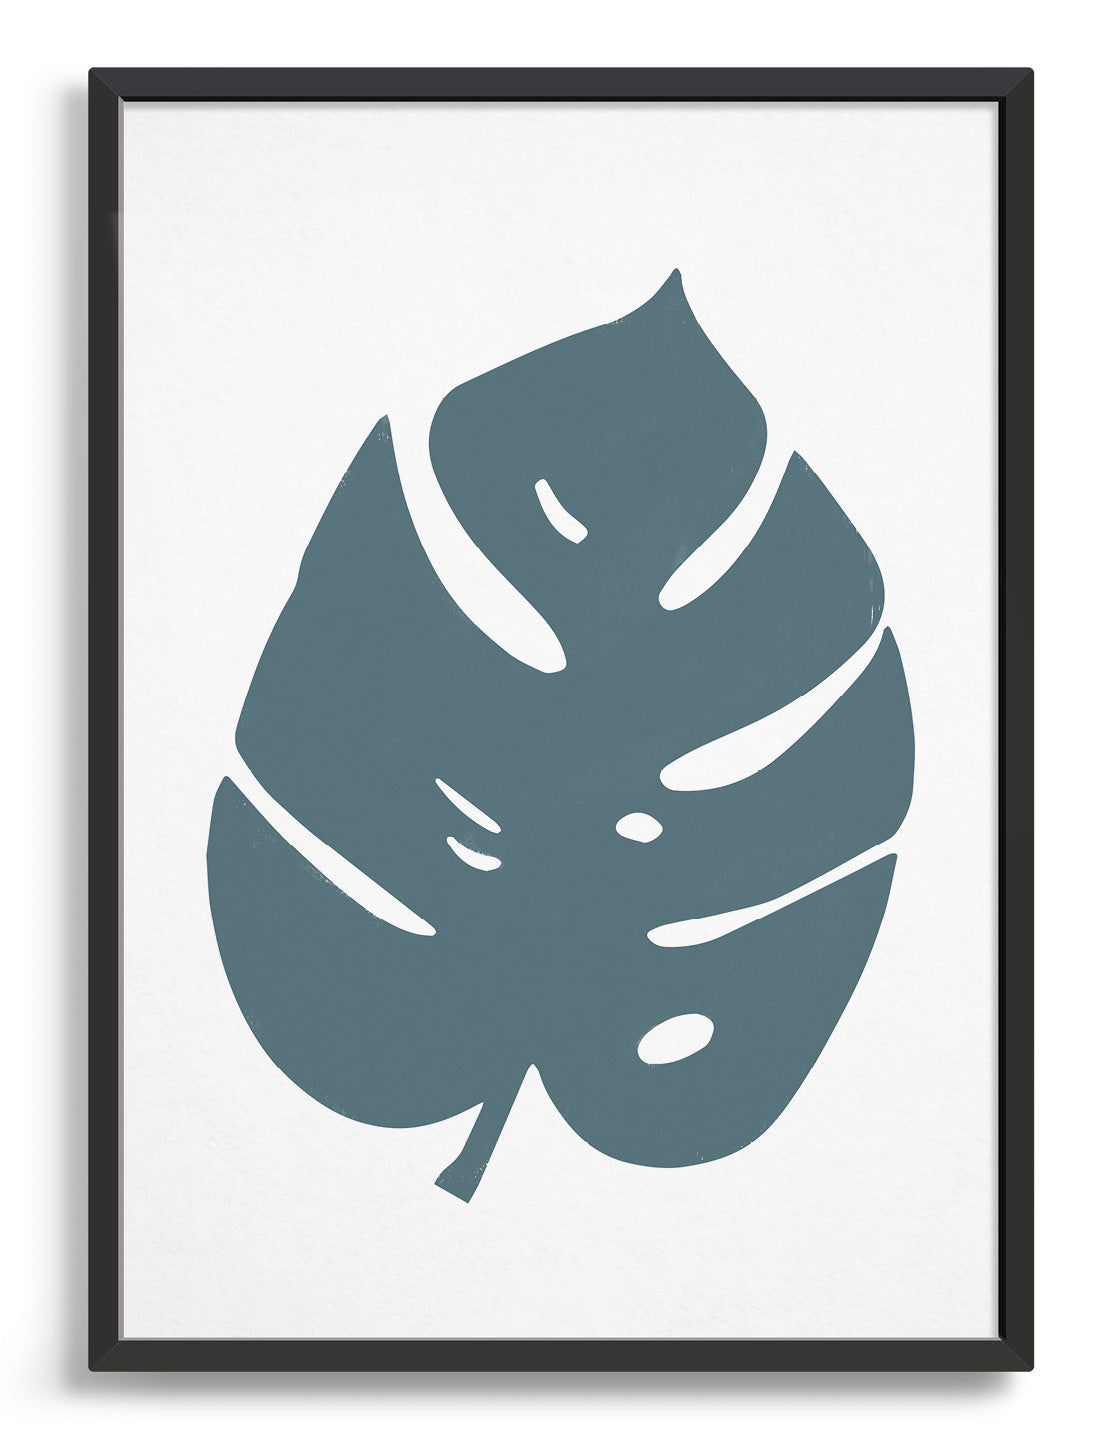 Art print depicting a large blue monstera leaf against a white background